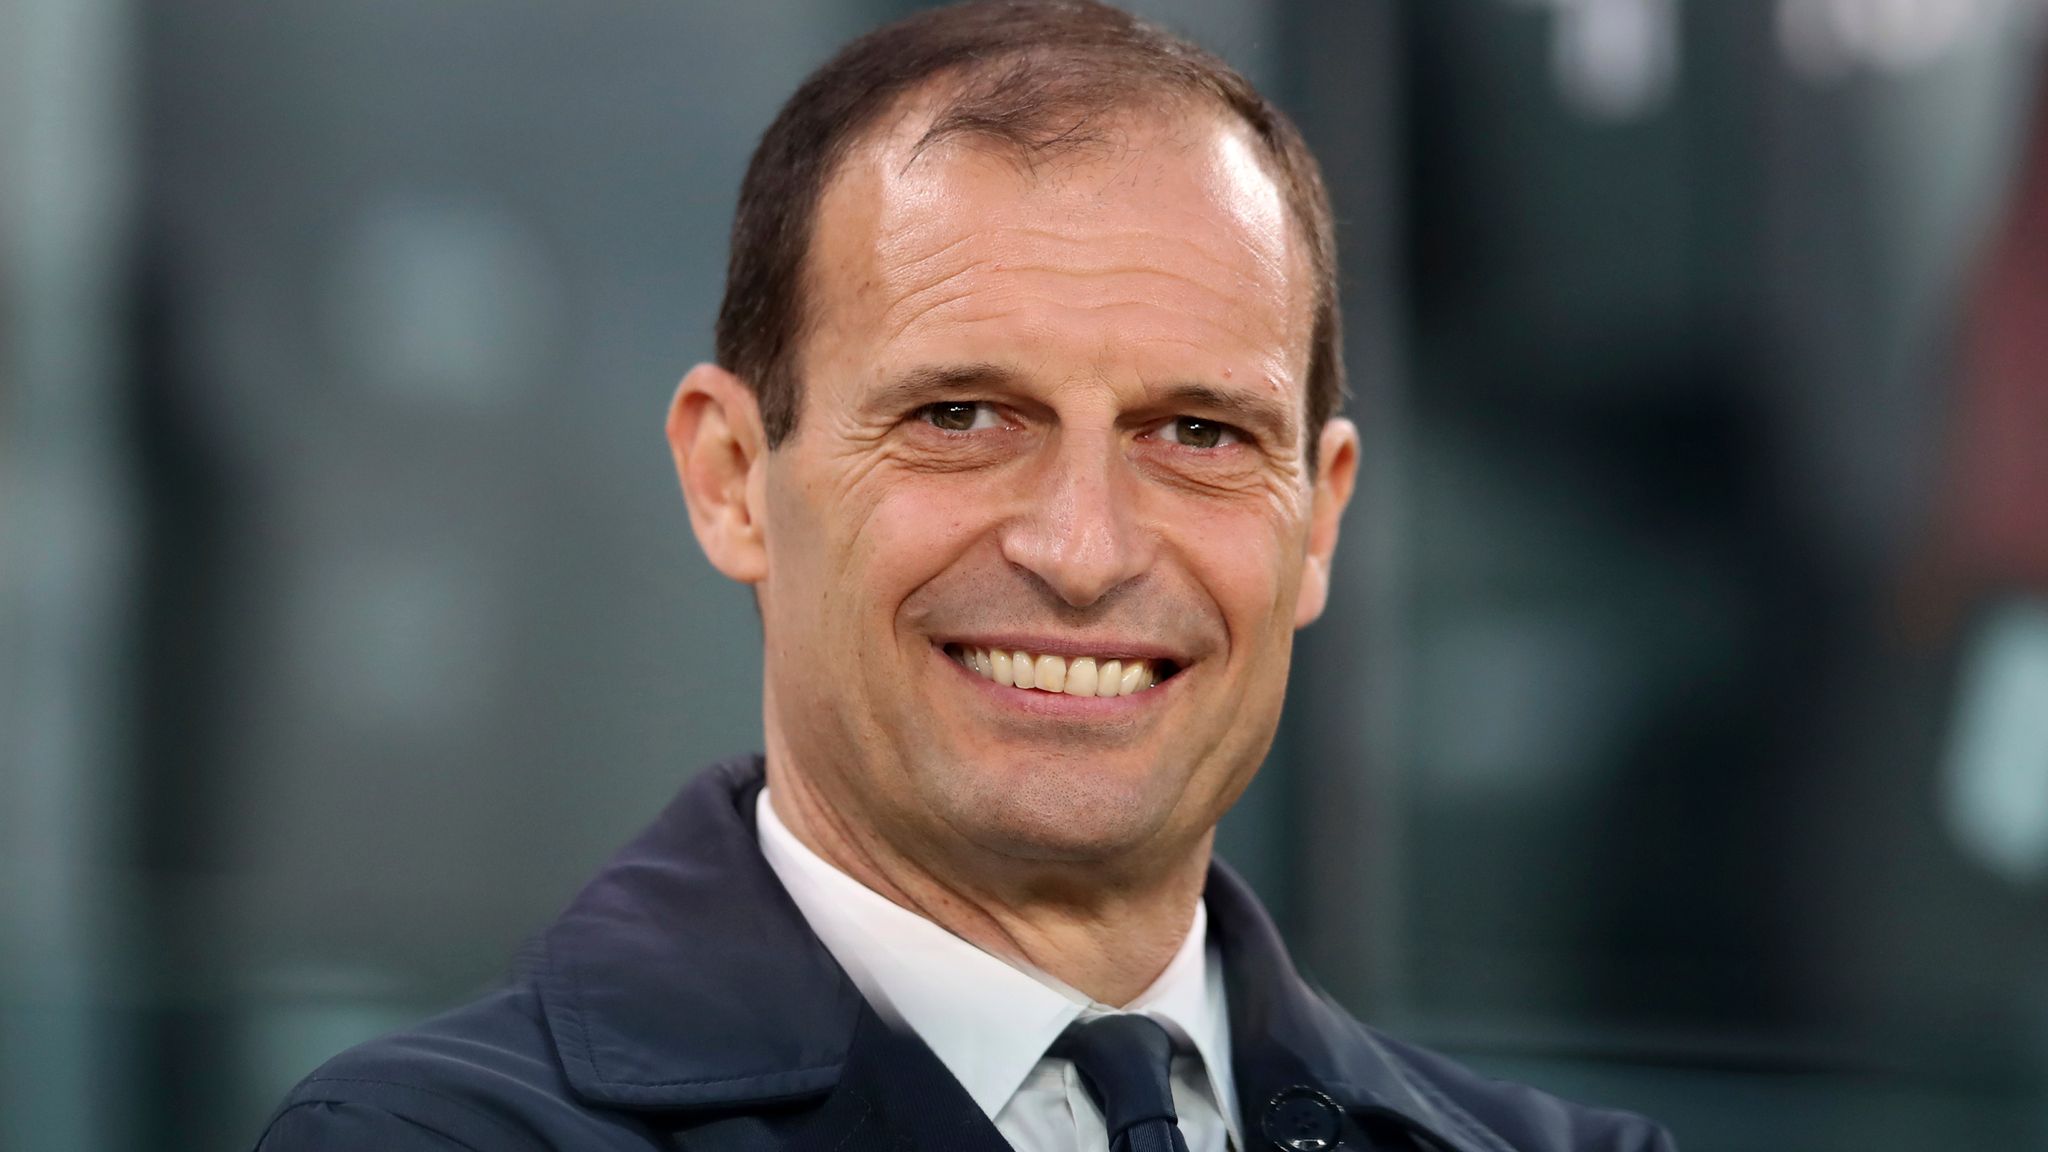 Massimiliano Allegri Re Appointed As Juventus Manager After Andrea Pirlo Sacking